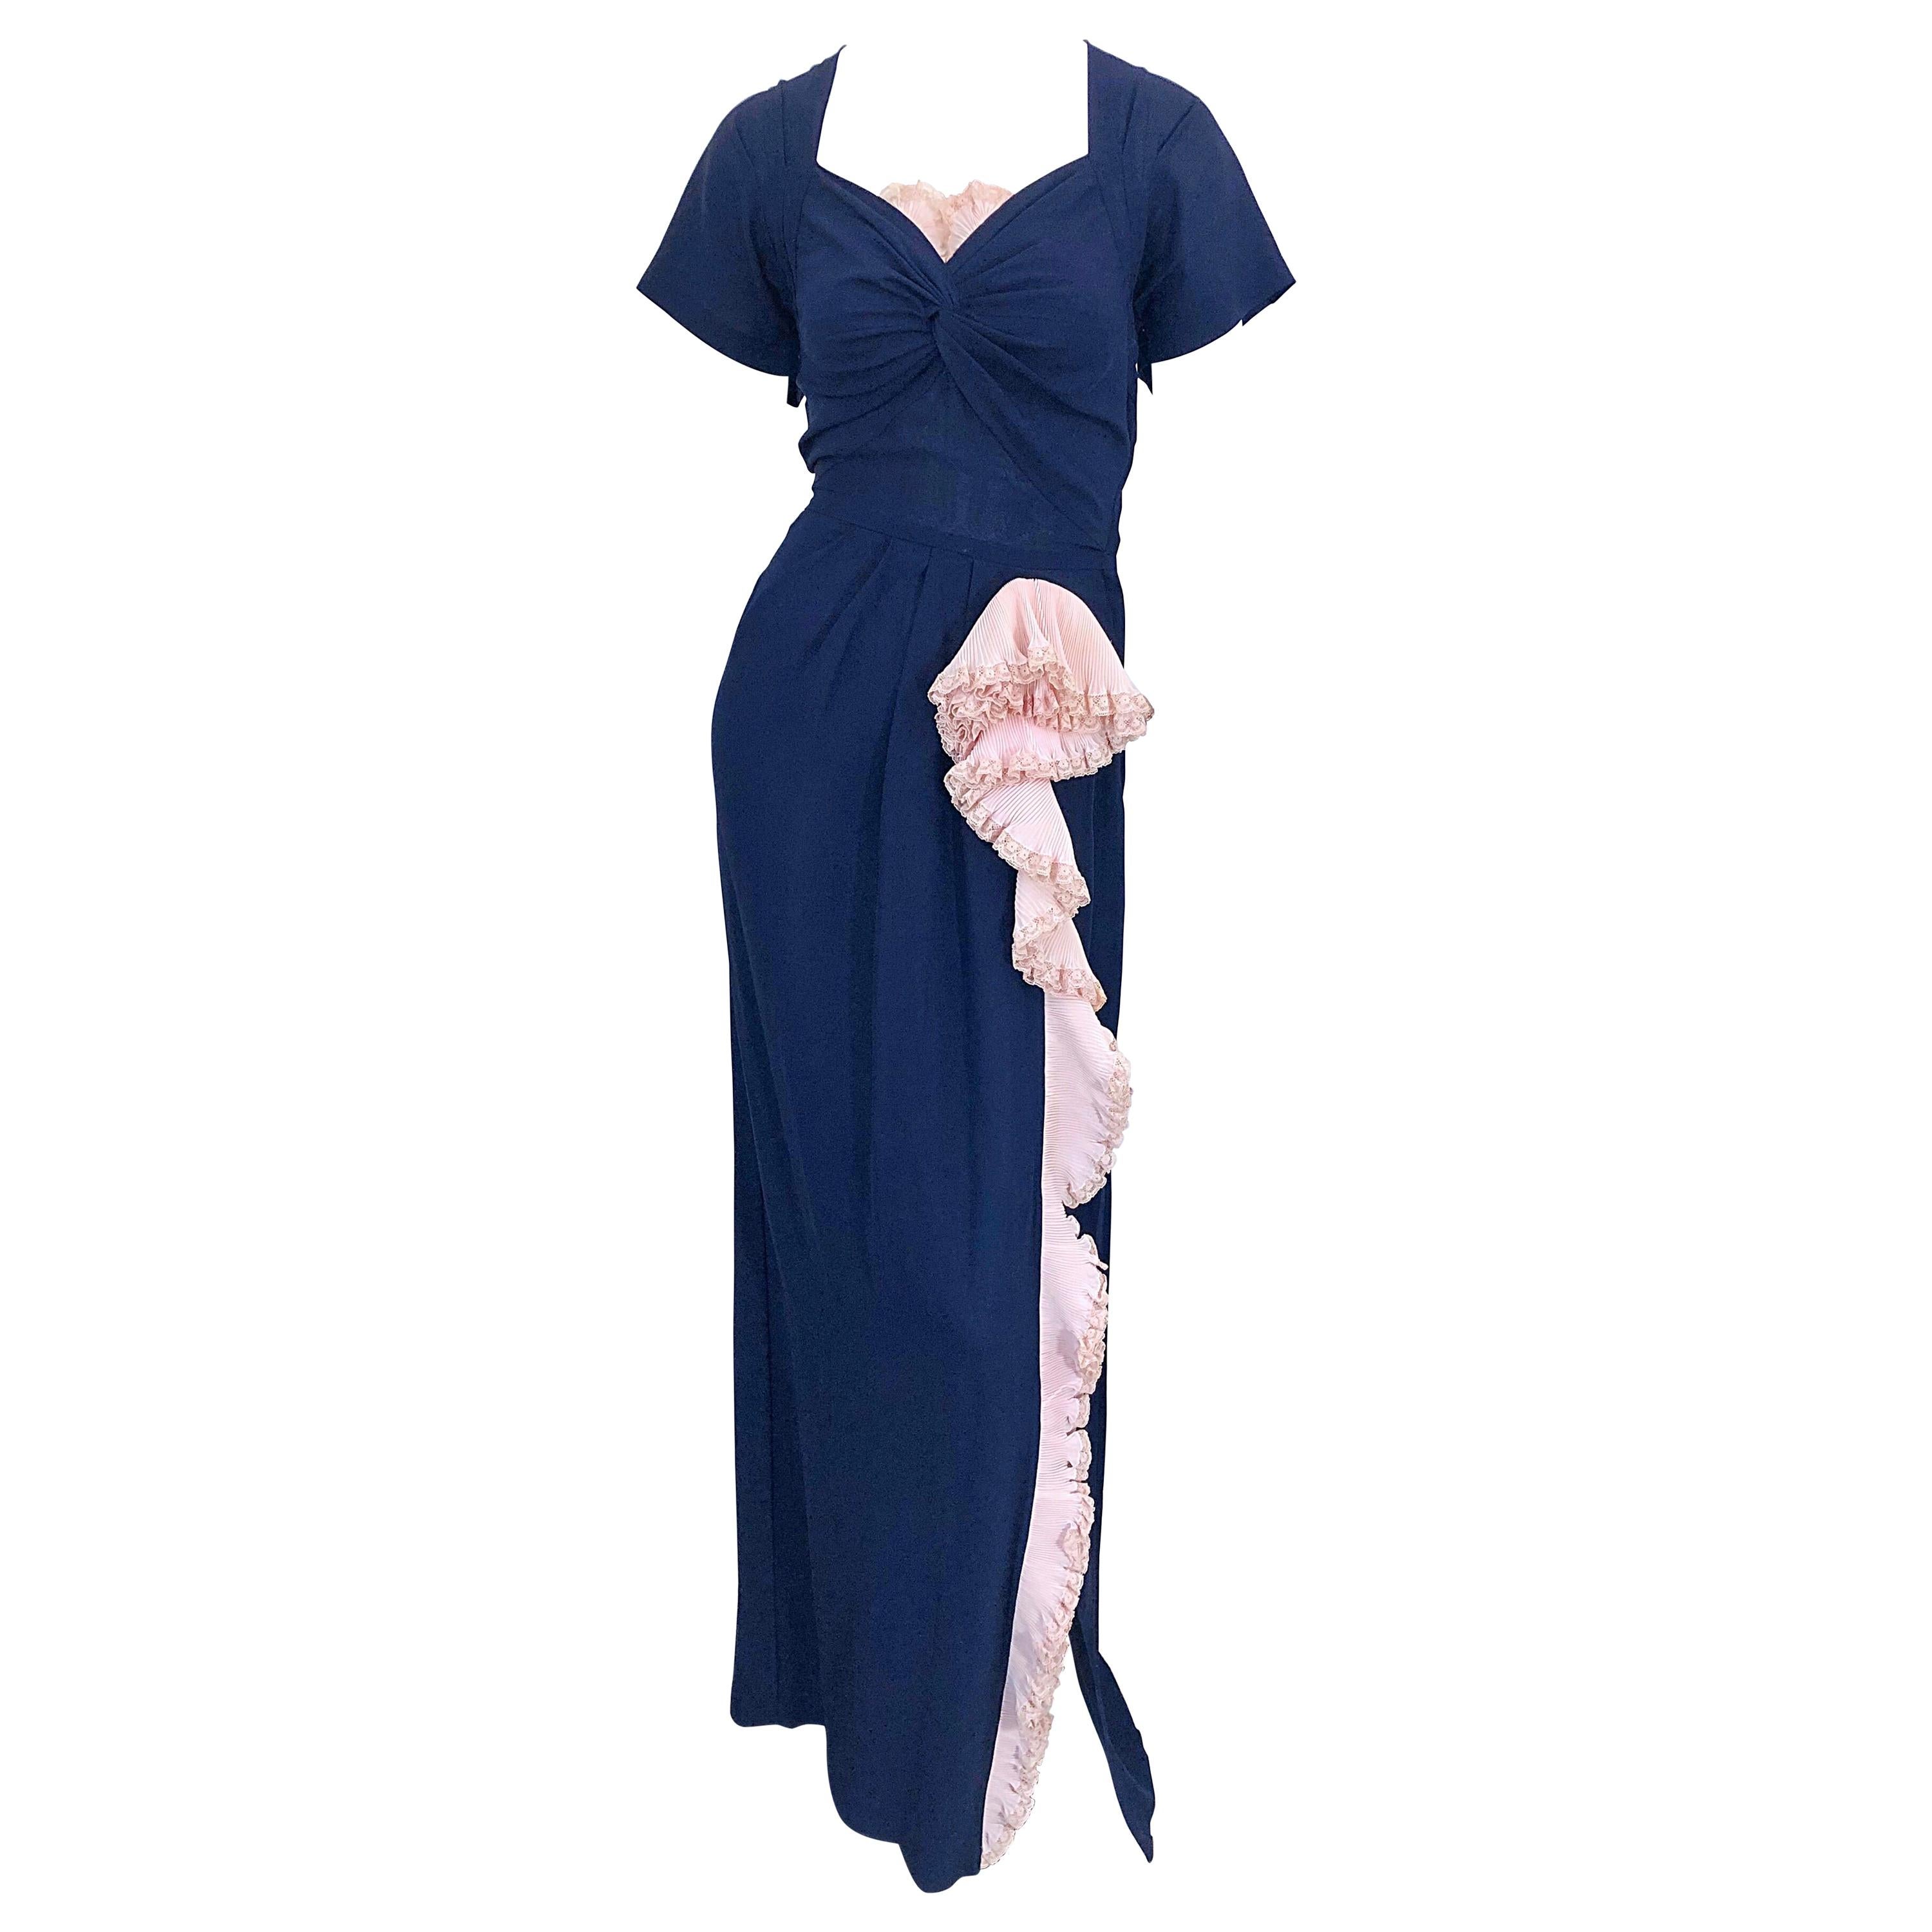 1940s Demi Couture Navy Blue + Pale Pink Short Sleeve 40s Vintage Gown / Dress